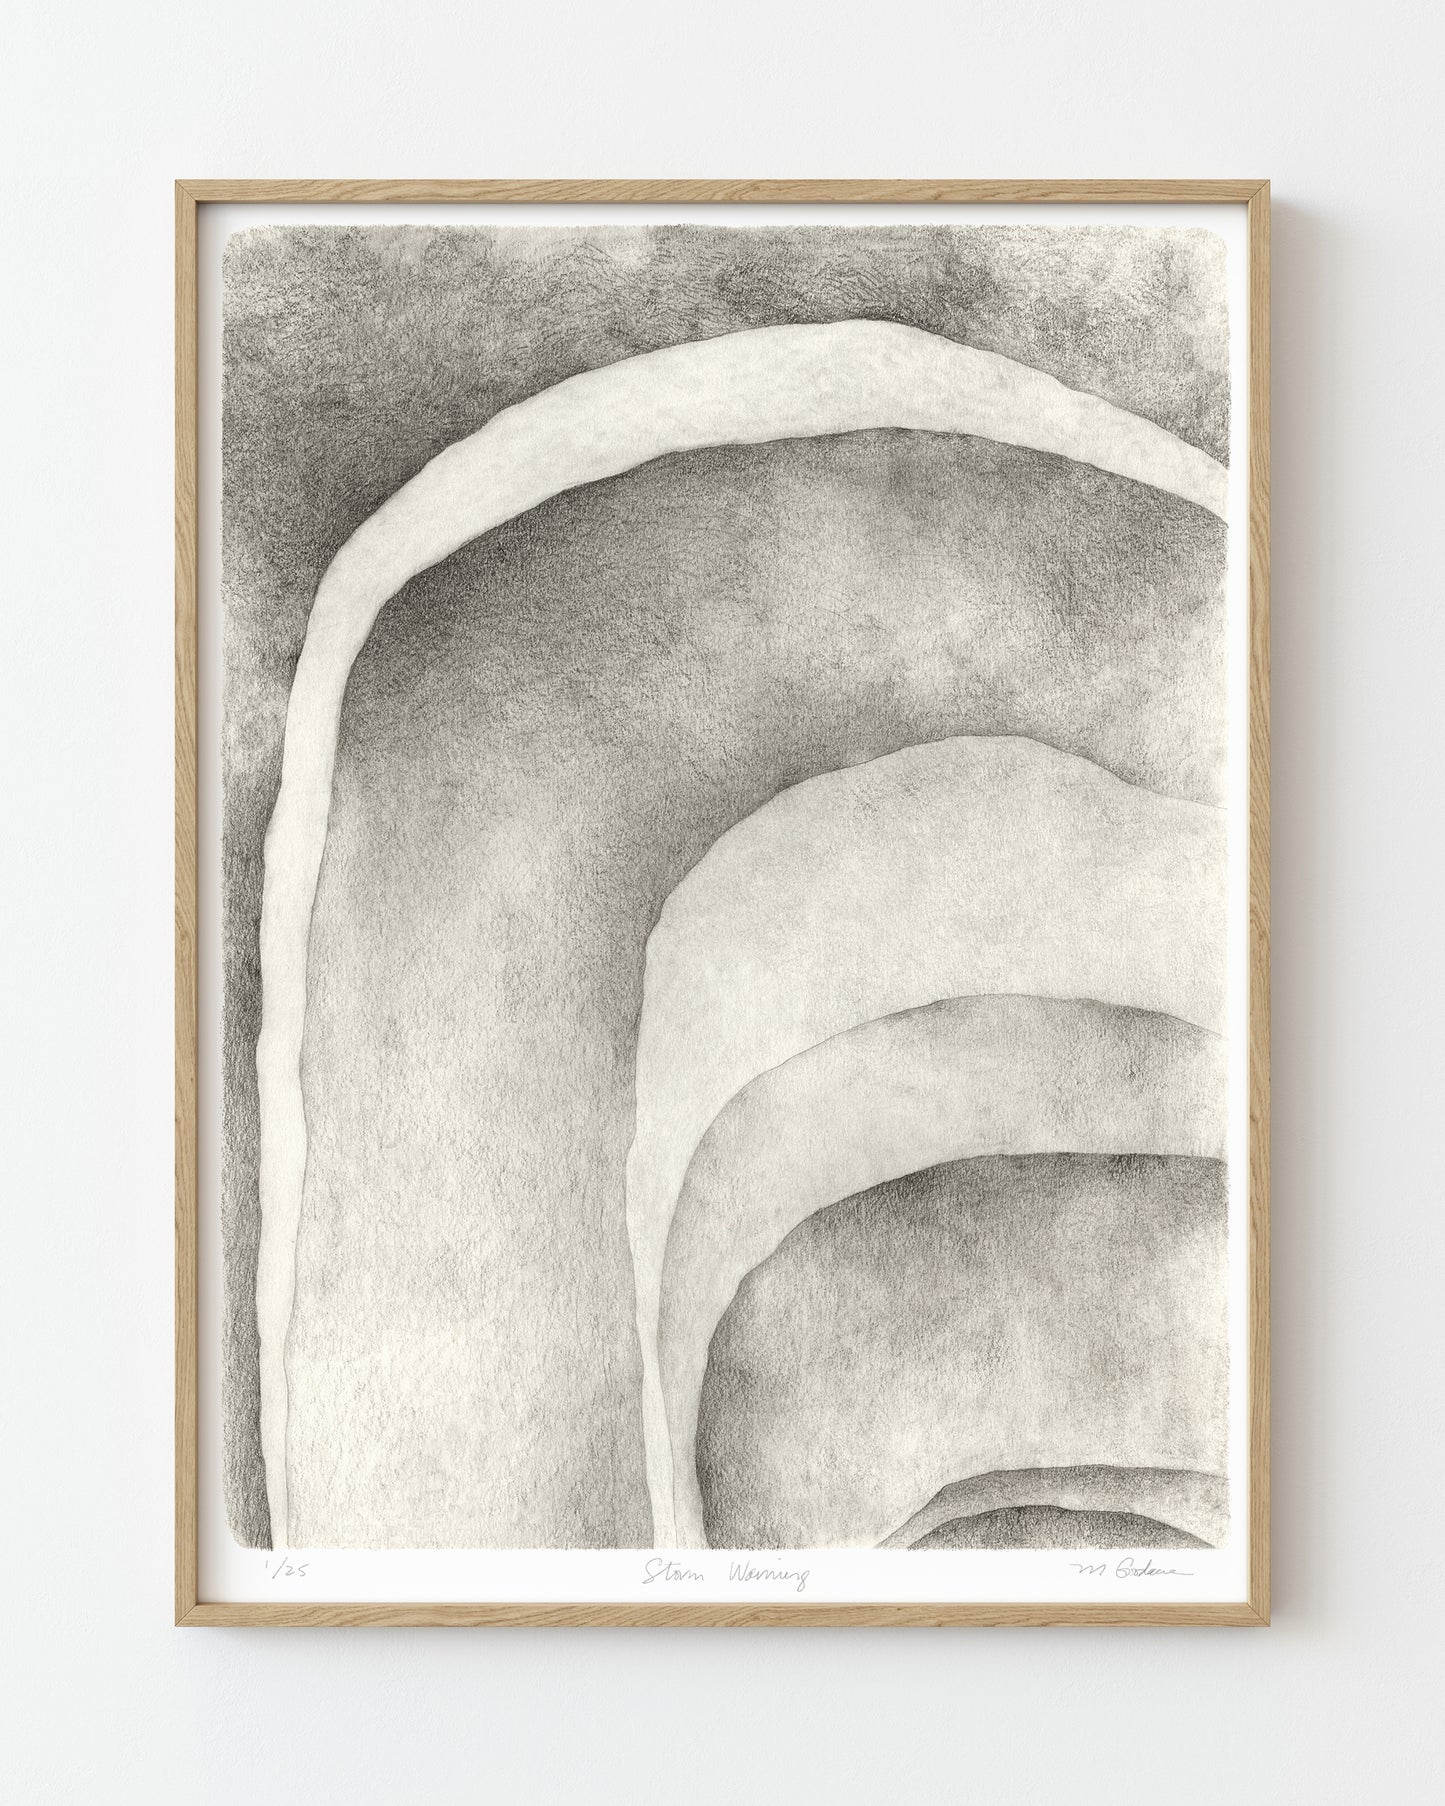 Framed abstract graphite drawing of shaded curved shapes.